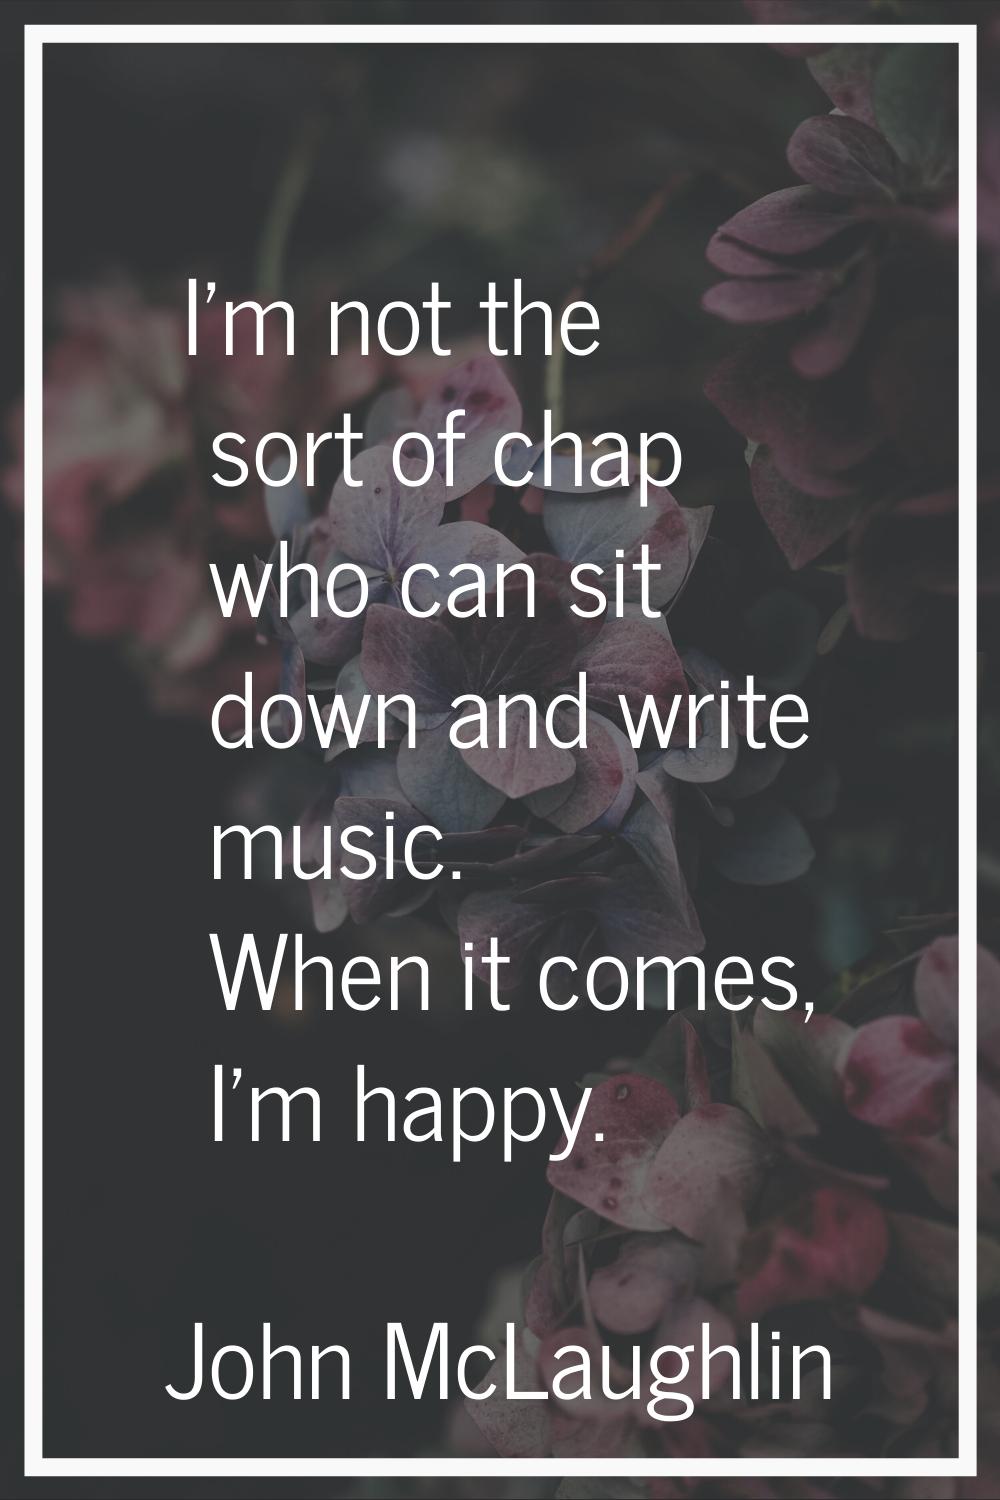 I'm not the sort of chap who can sit down and write music. When it comes, I'm happy.